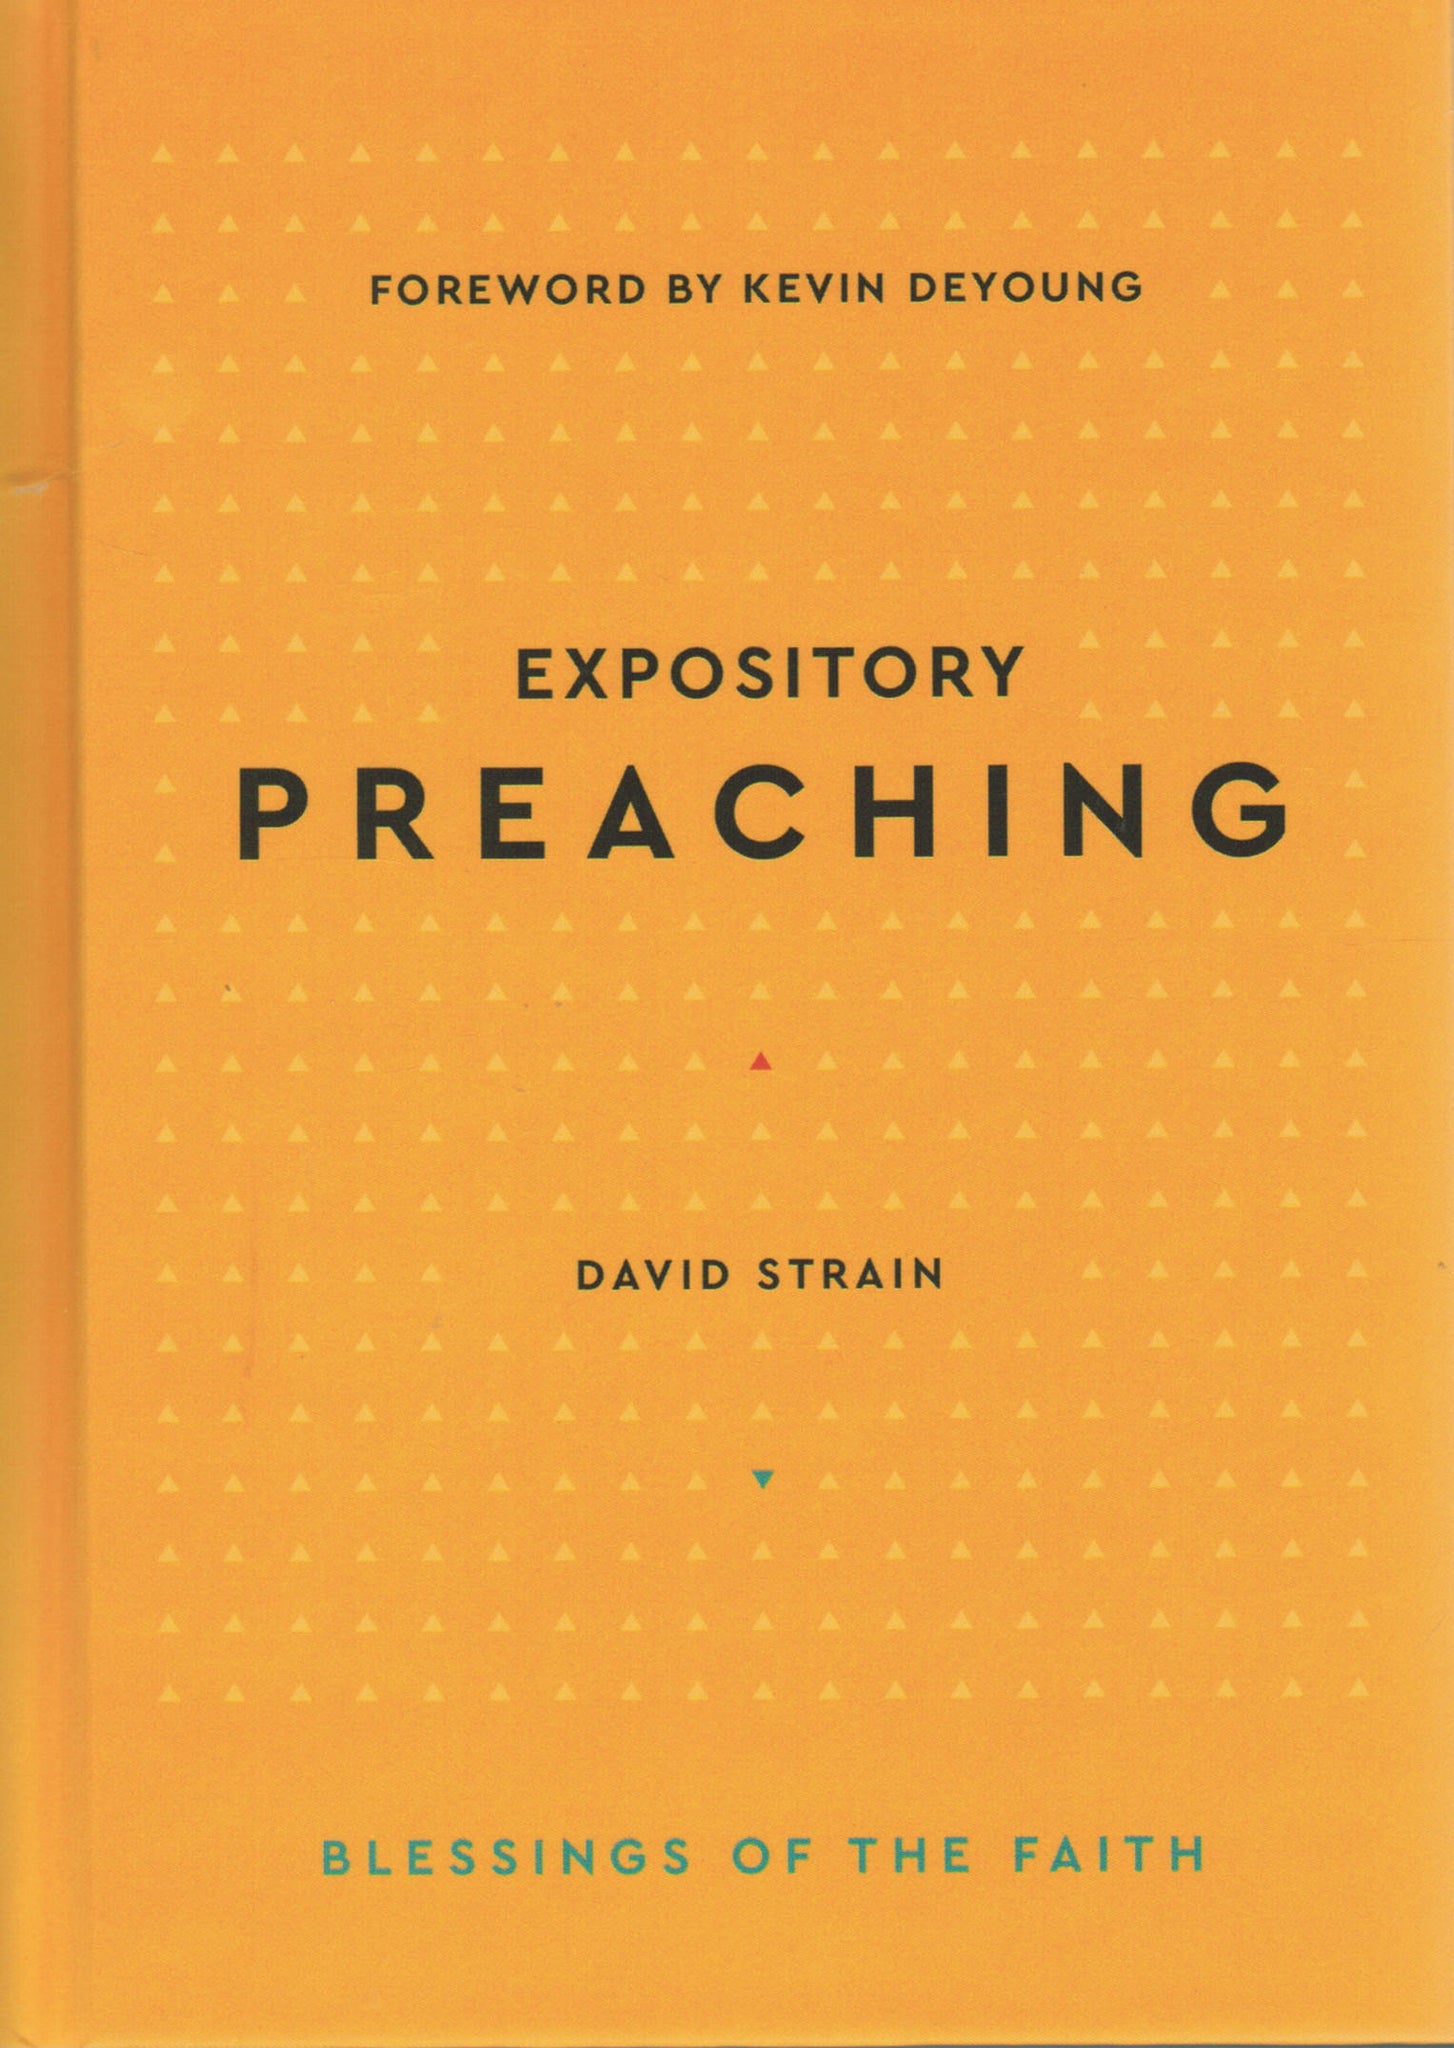 Blessings of the Faith - Expository Preaching